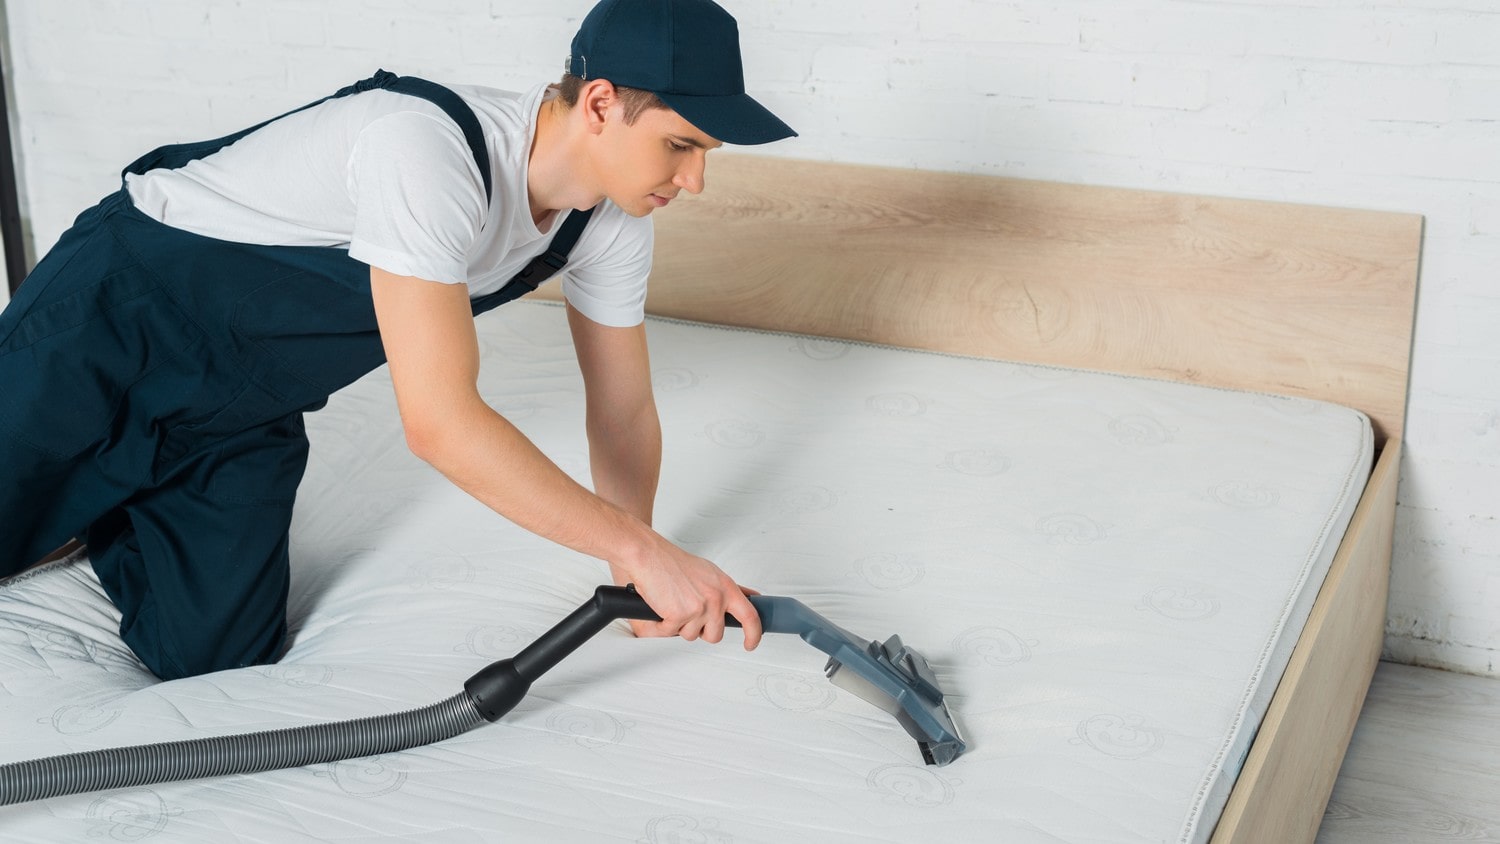 A close-up of a person cleaning a mattress with a vacuum cleaner, removing dust and dirt particles.